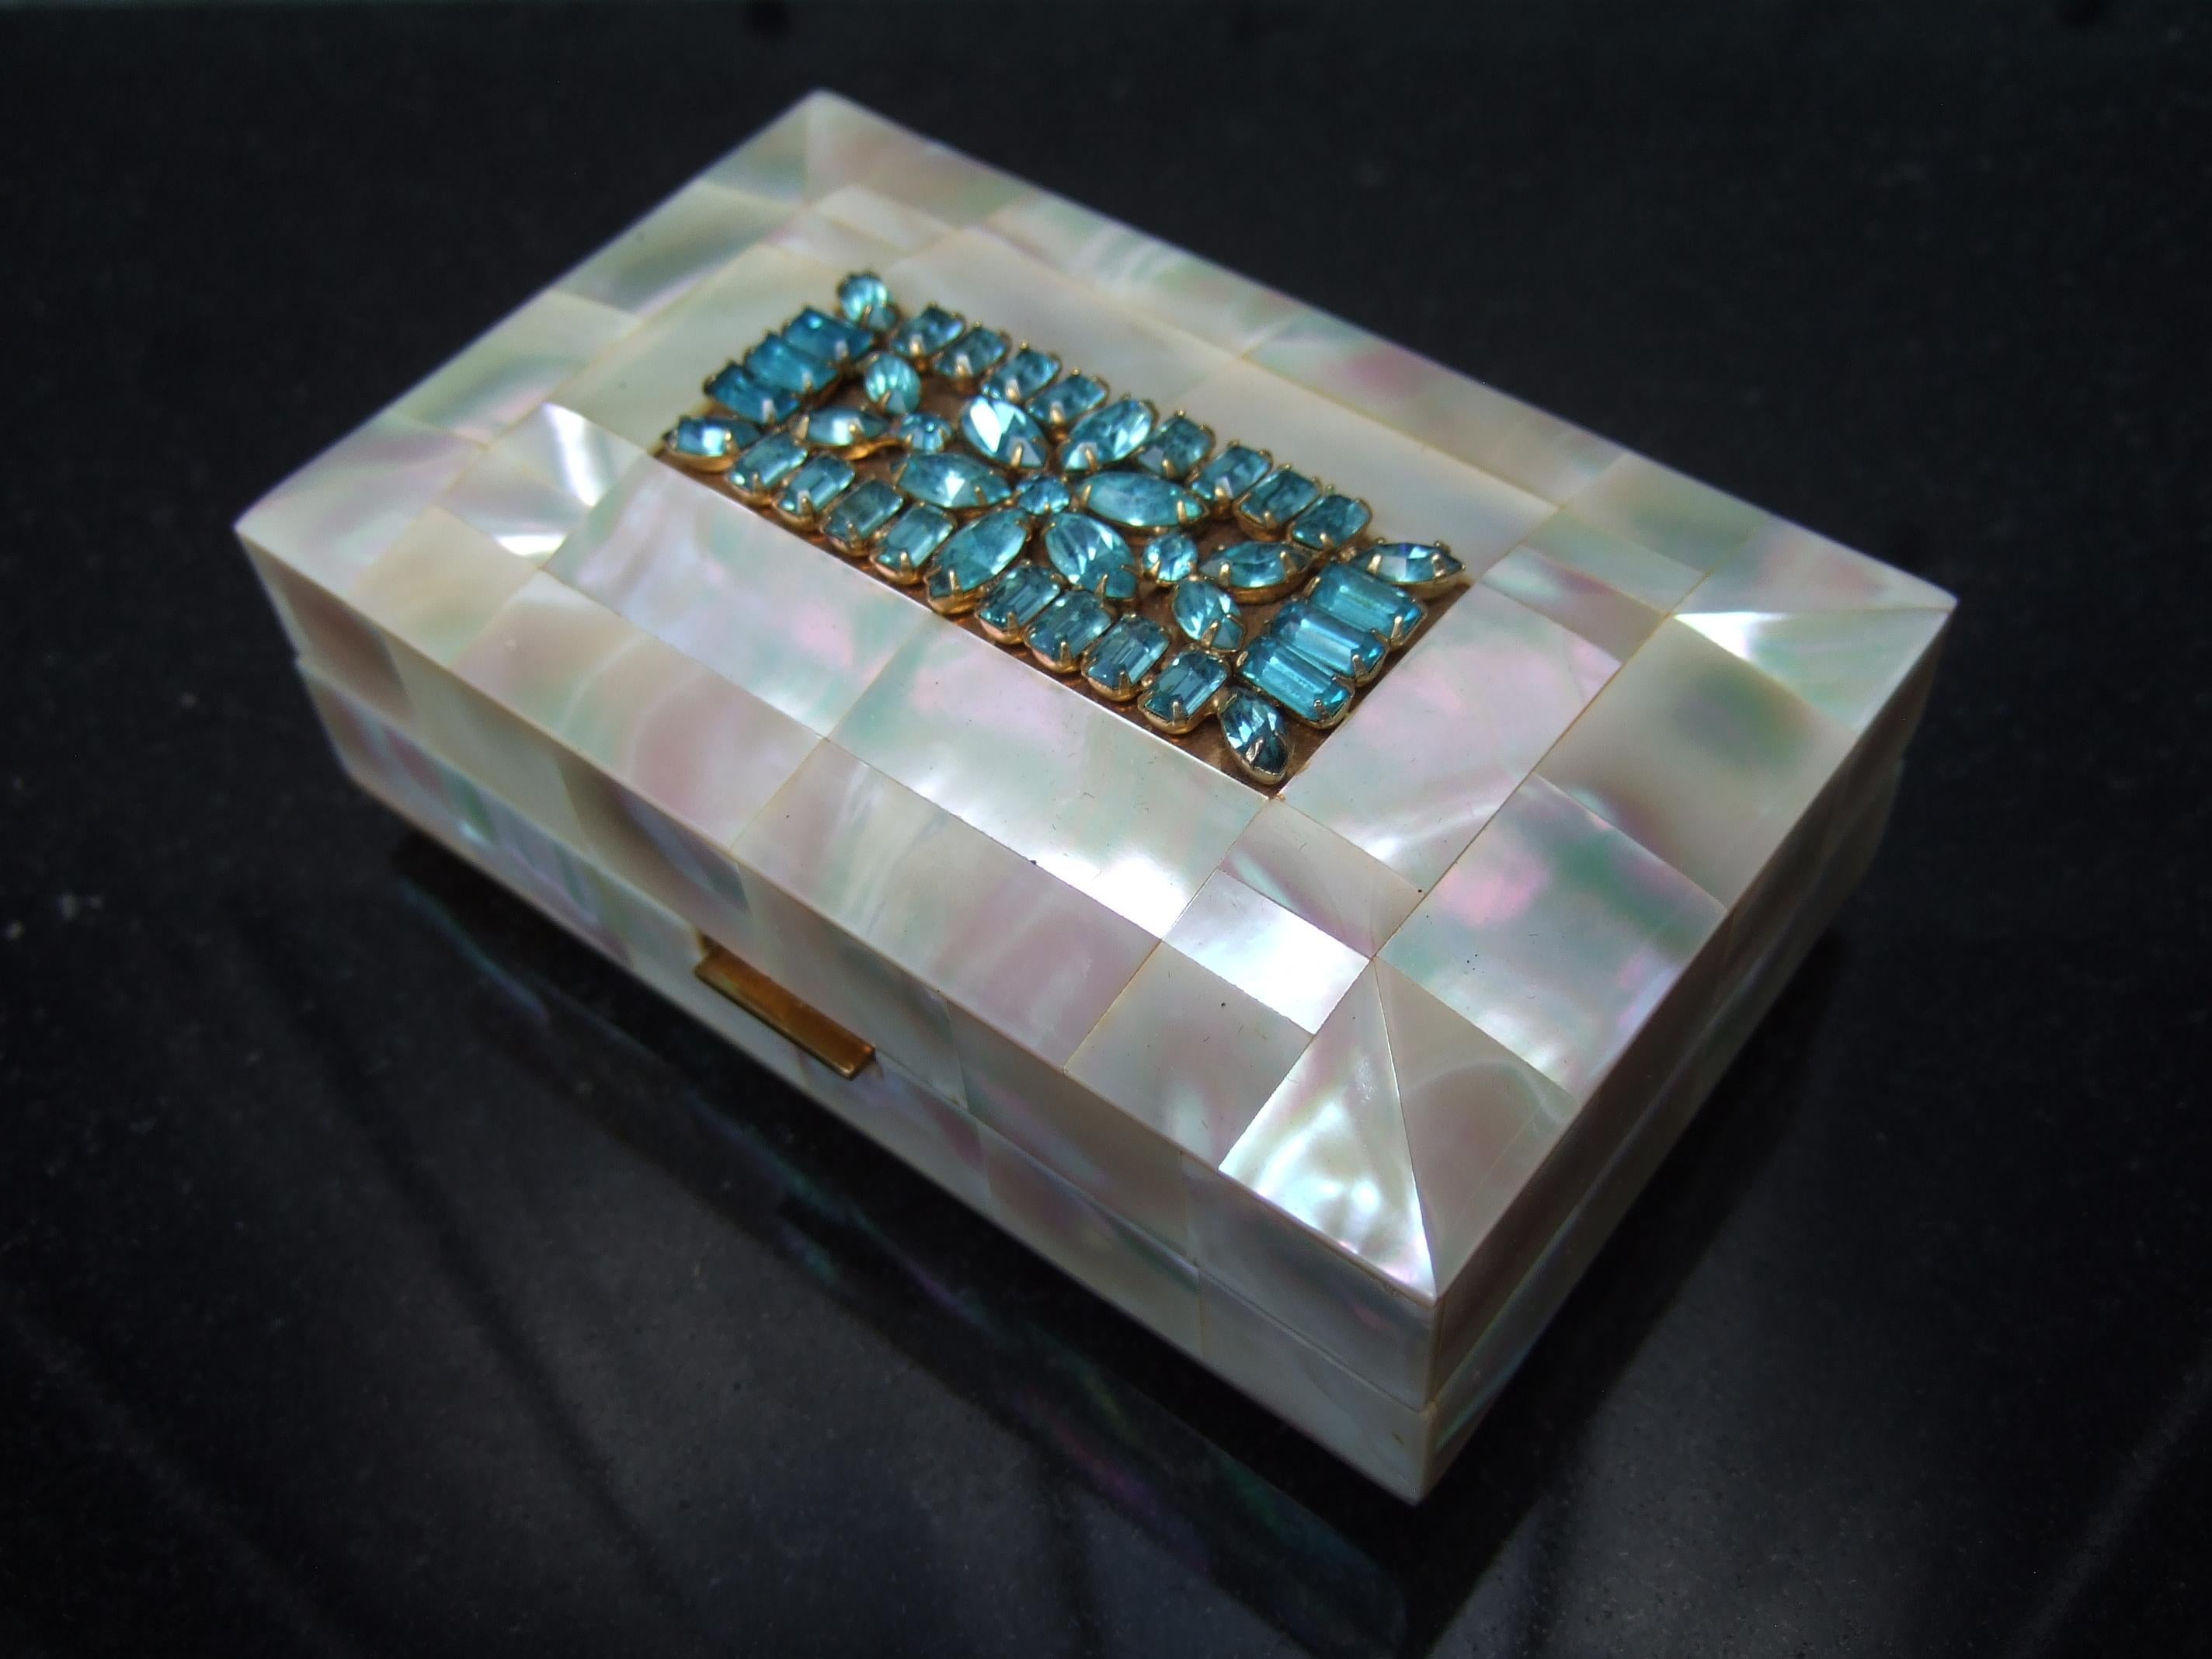 Opulent Mother of Pearl Crystal Encrusted Compact Evening Bag by Elgin c 1950s For Sale 4